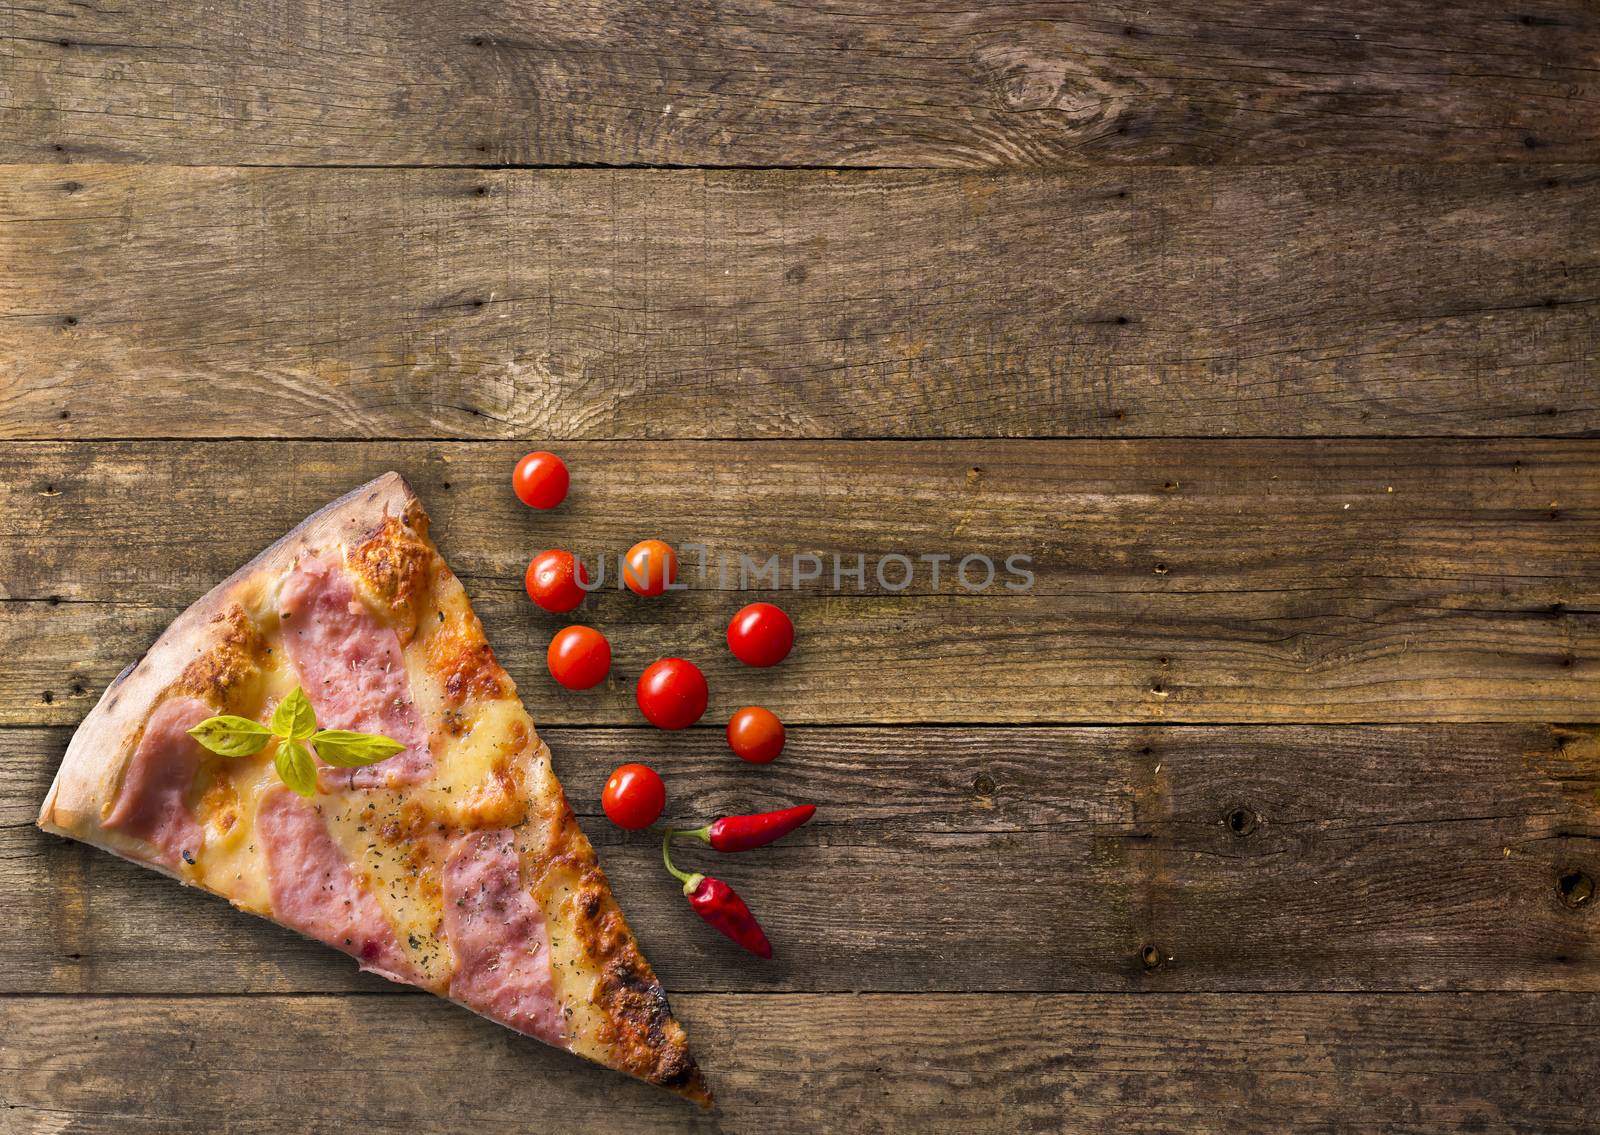 Diferents types of pizza cut on wooden table by adamr